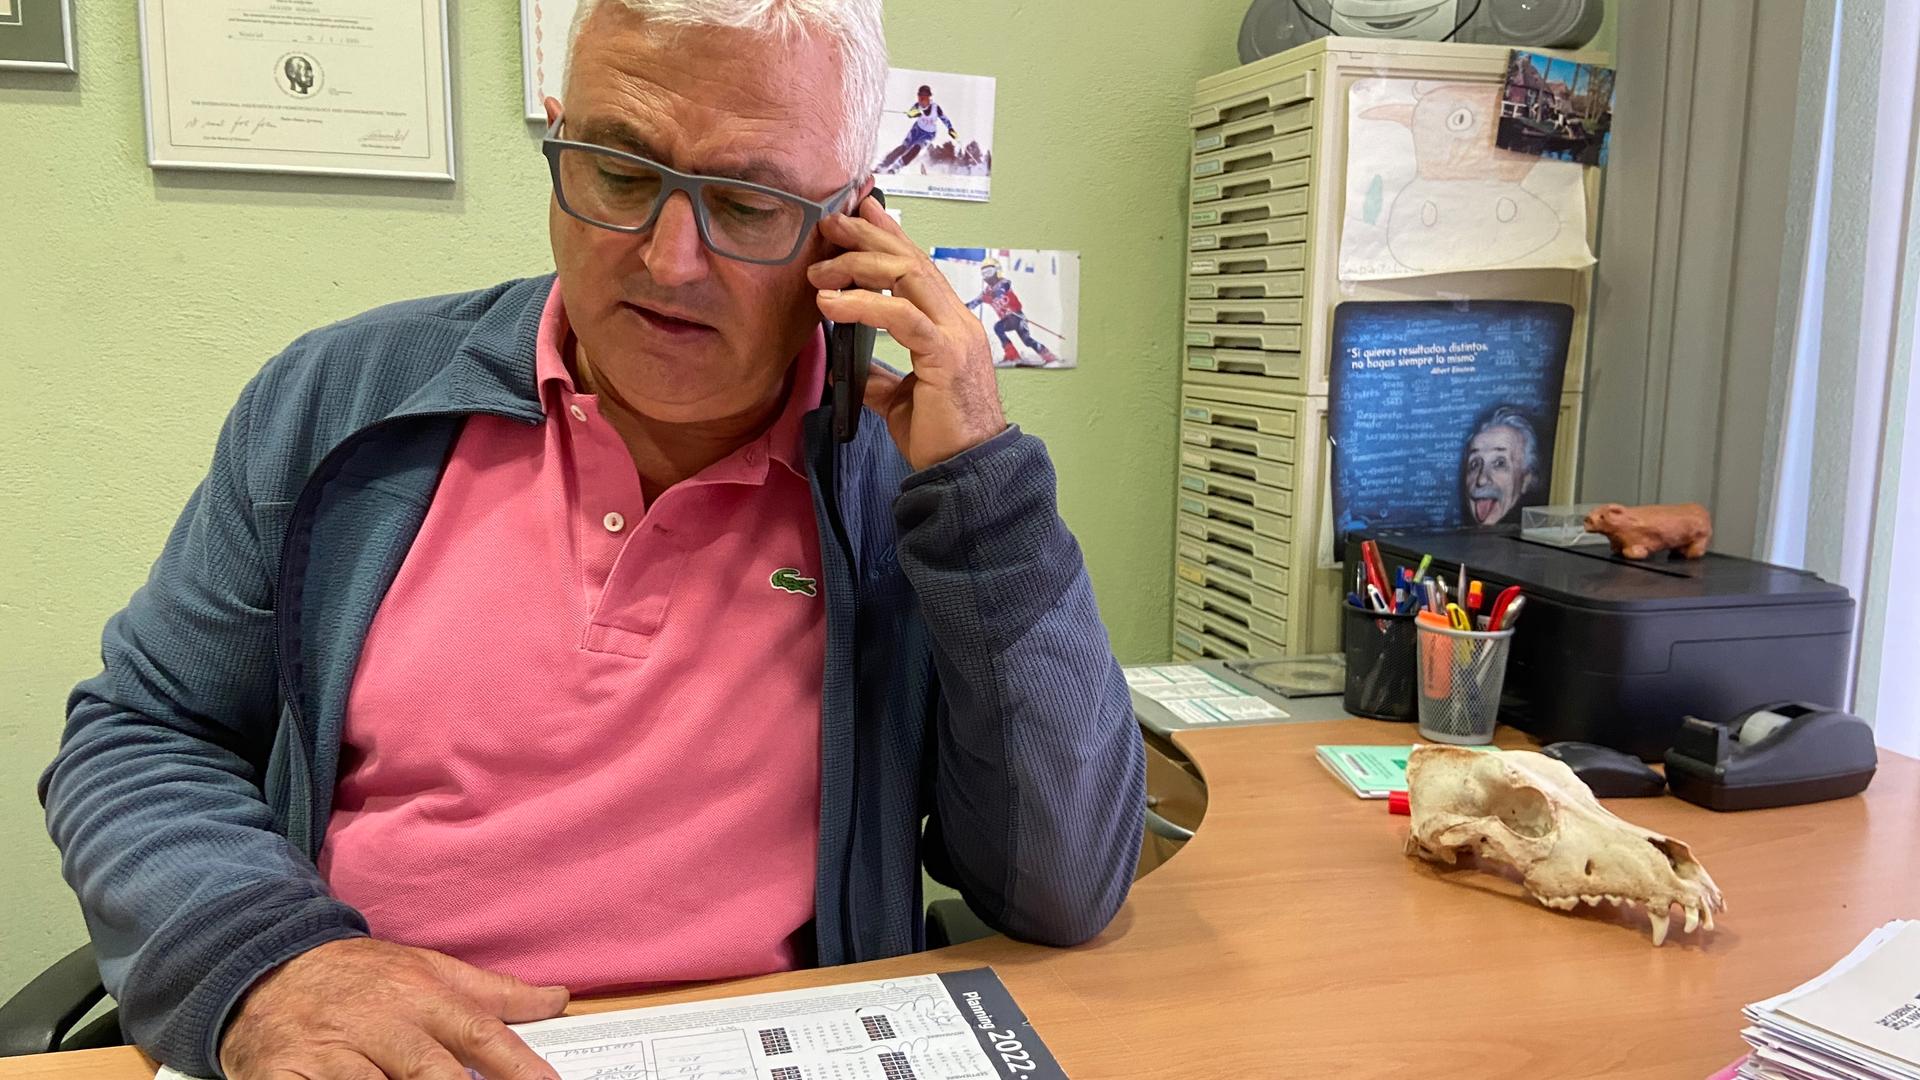 Close-up photo of a man sitting in an office on the phone. He is wearing a pink shirt and navy jacket.